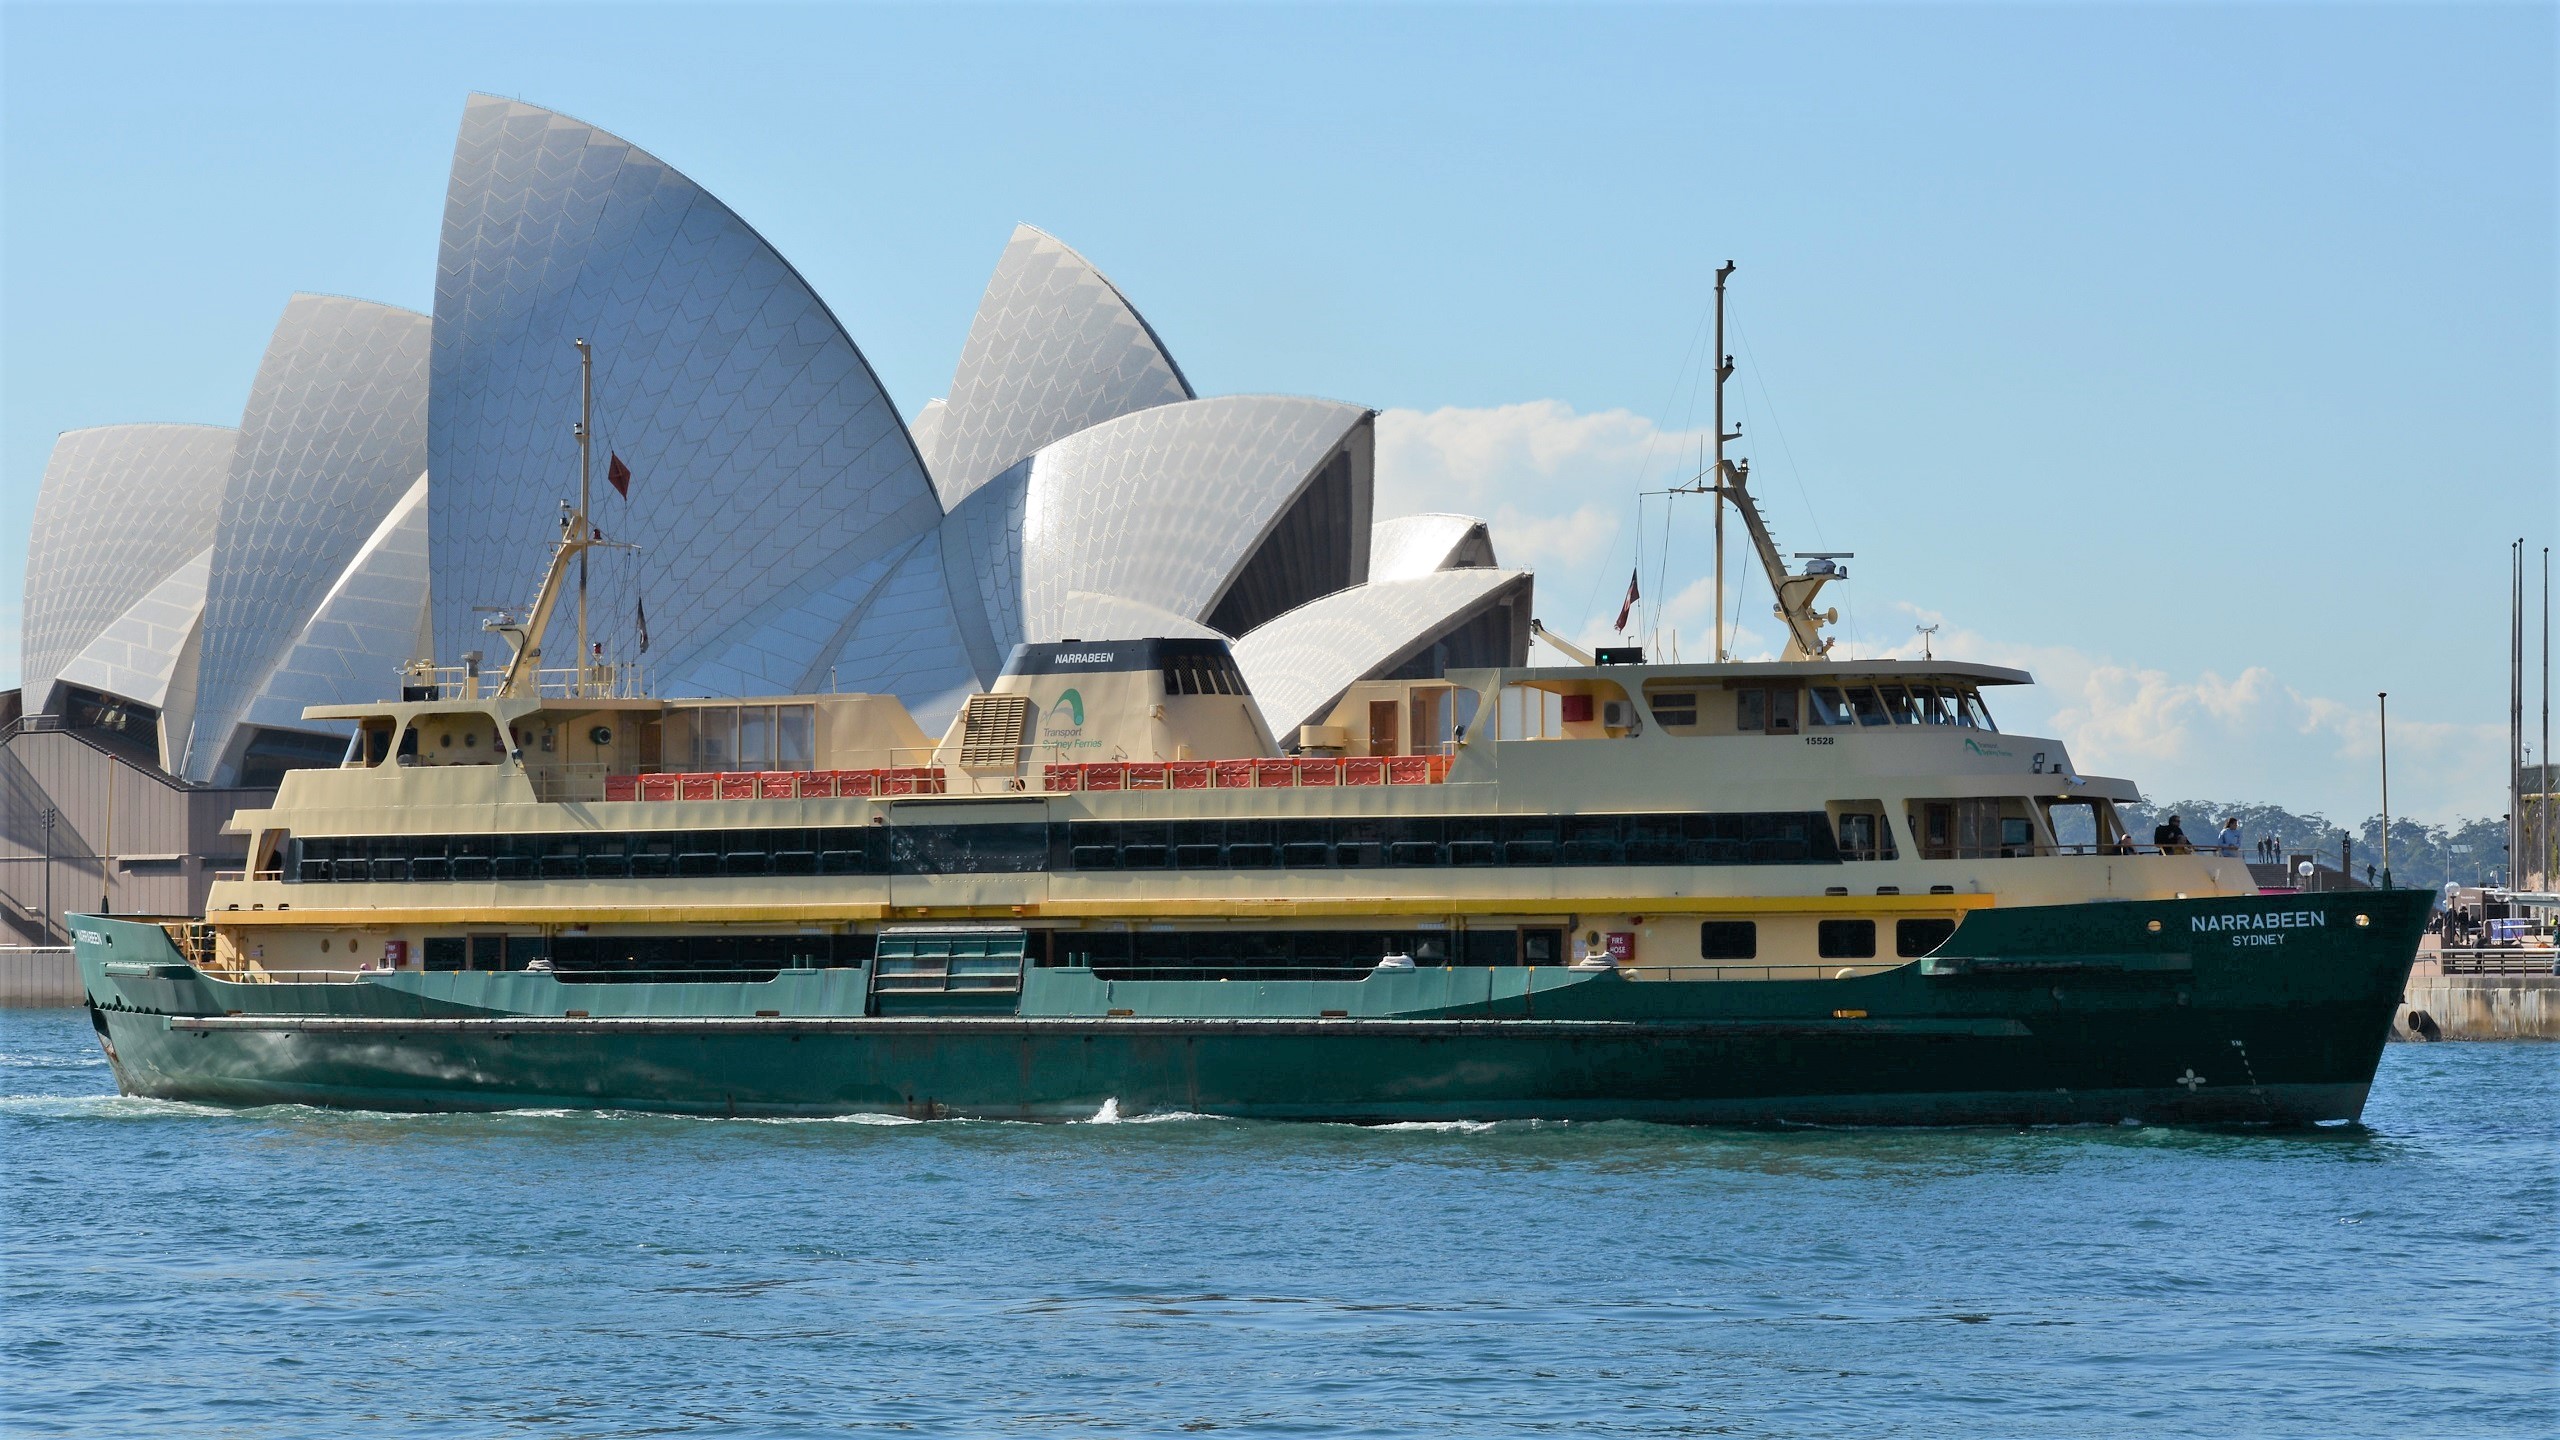 Manly Ferry Narrabeen on Sydney Harbour, Circular Quay, Australia by lonewolf6738